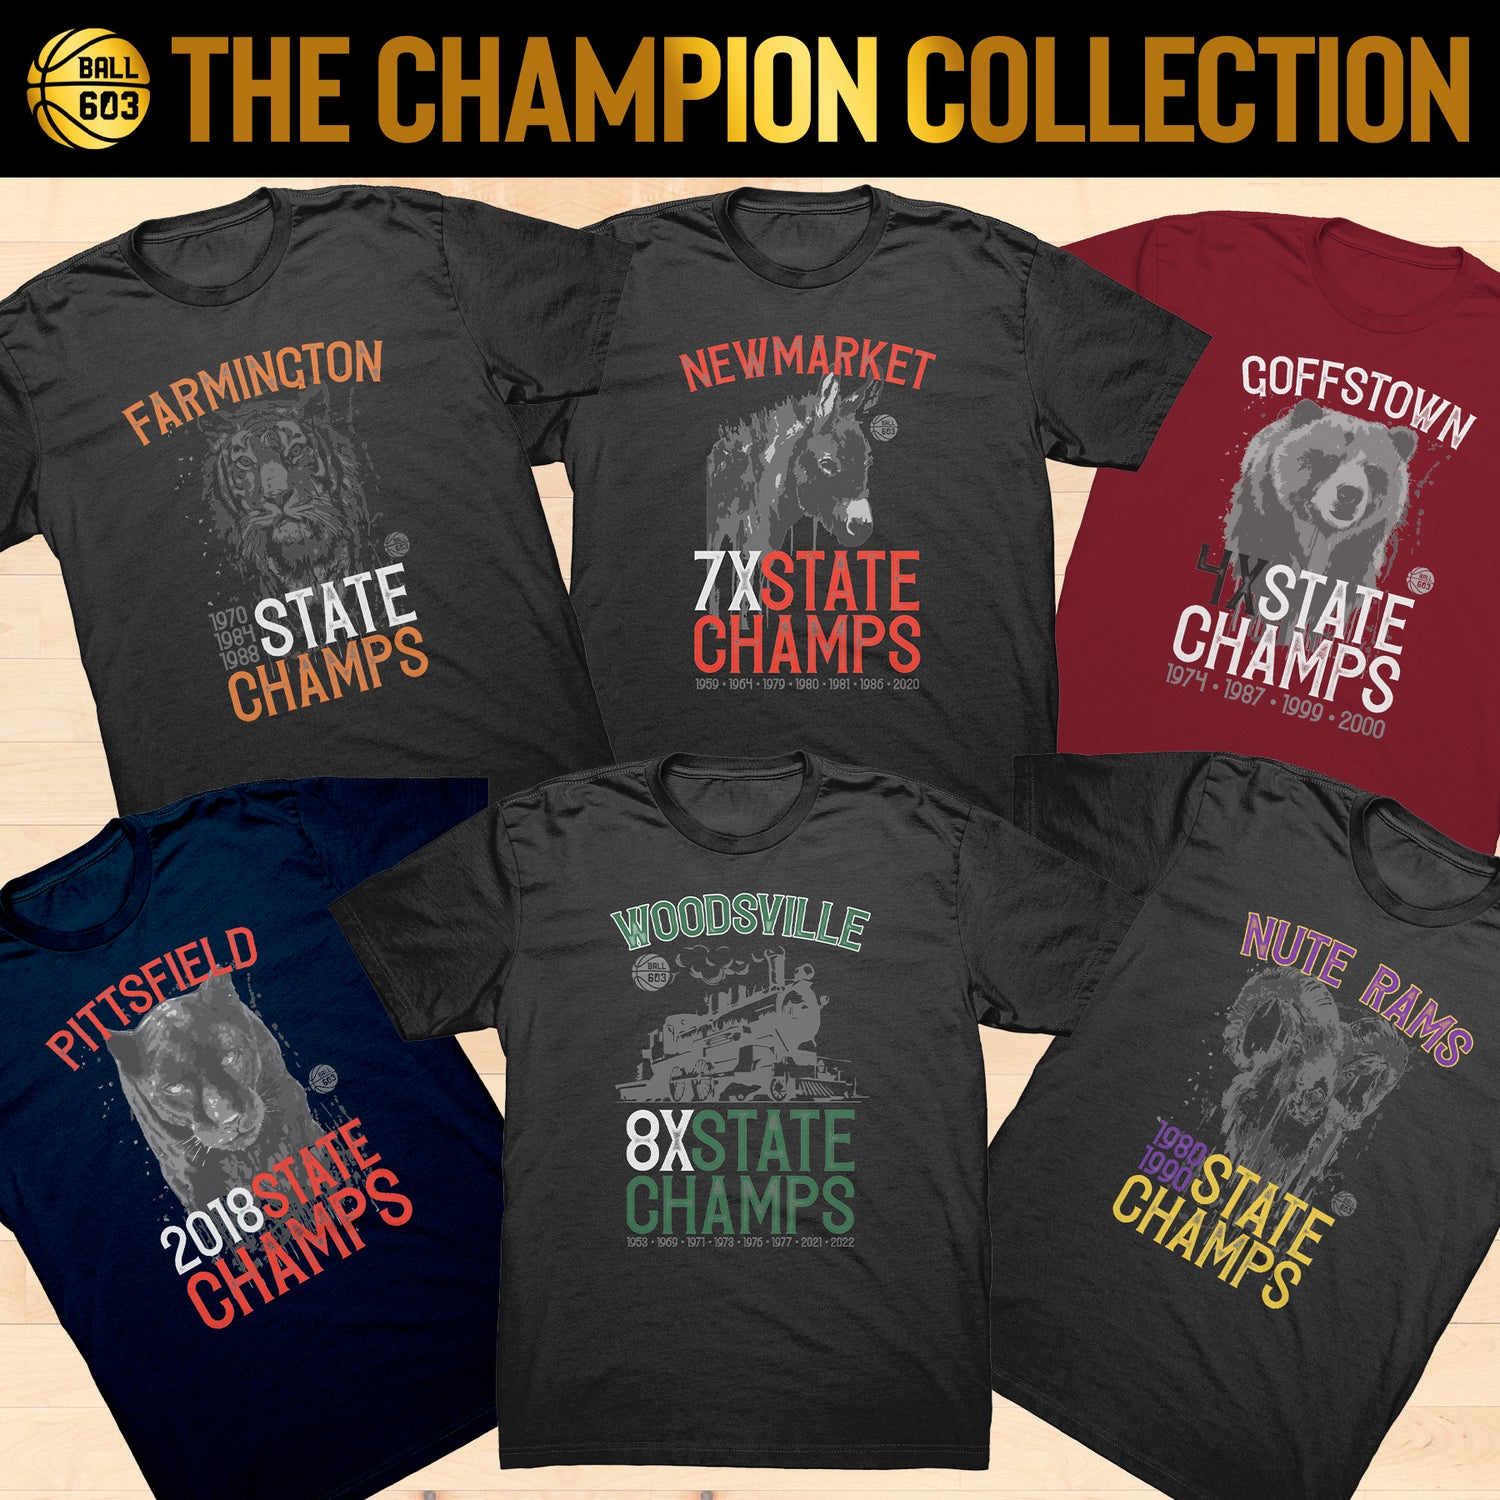 The Champion Collection